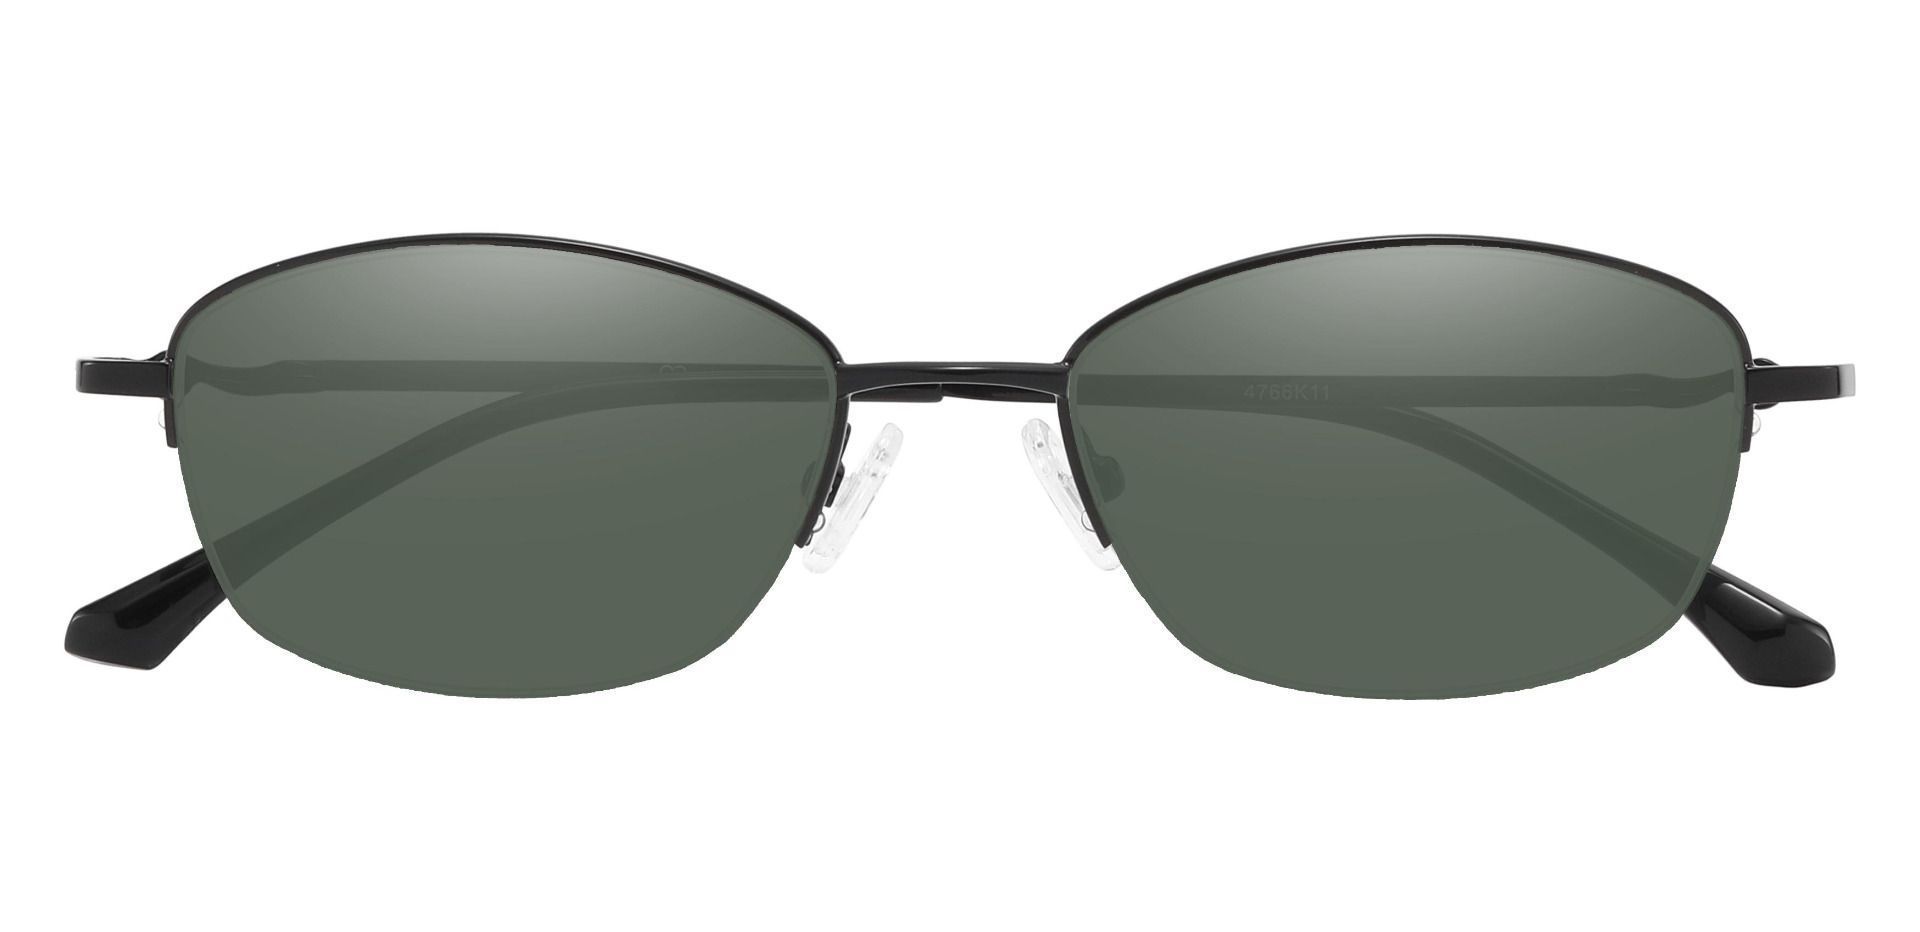 Beulah Oval Reading Sunglasses - Black Frame With Green Lenses